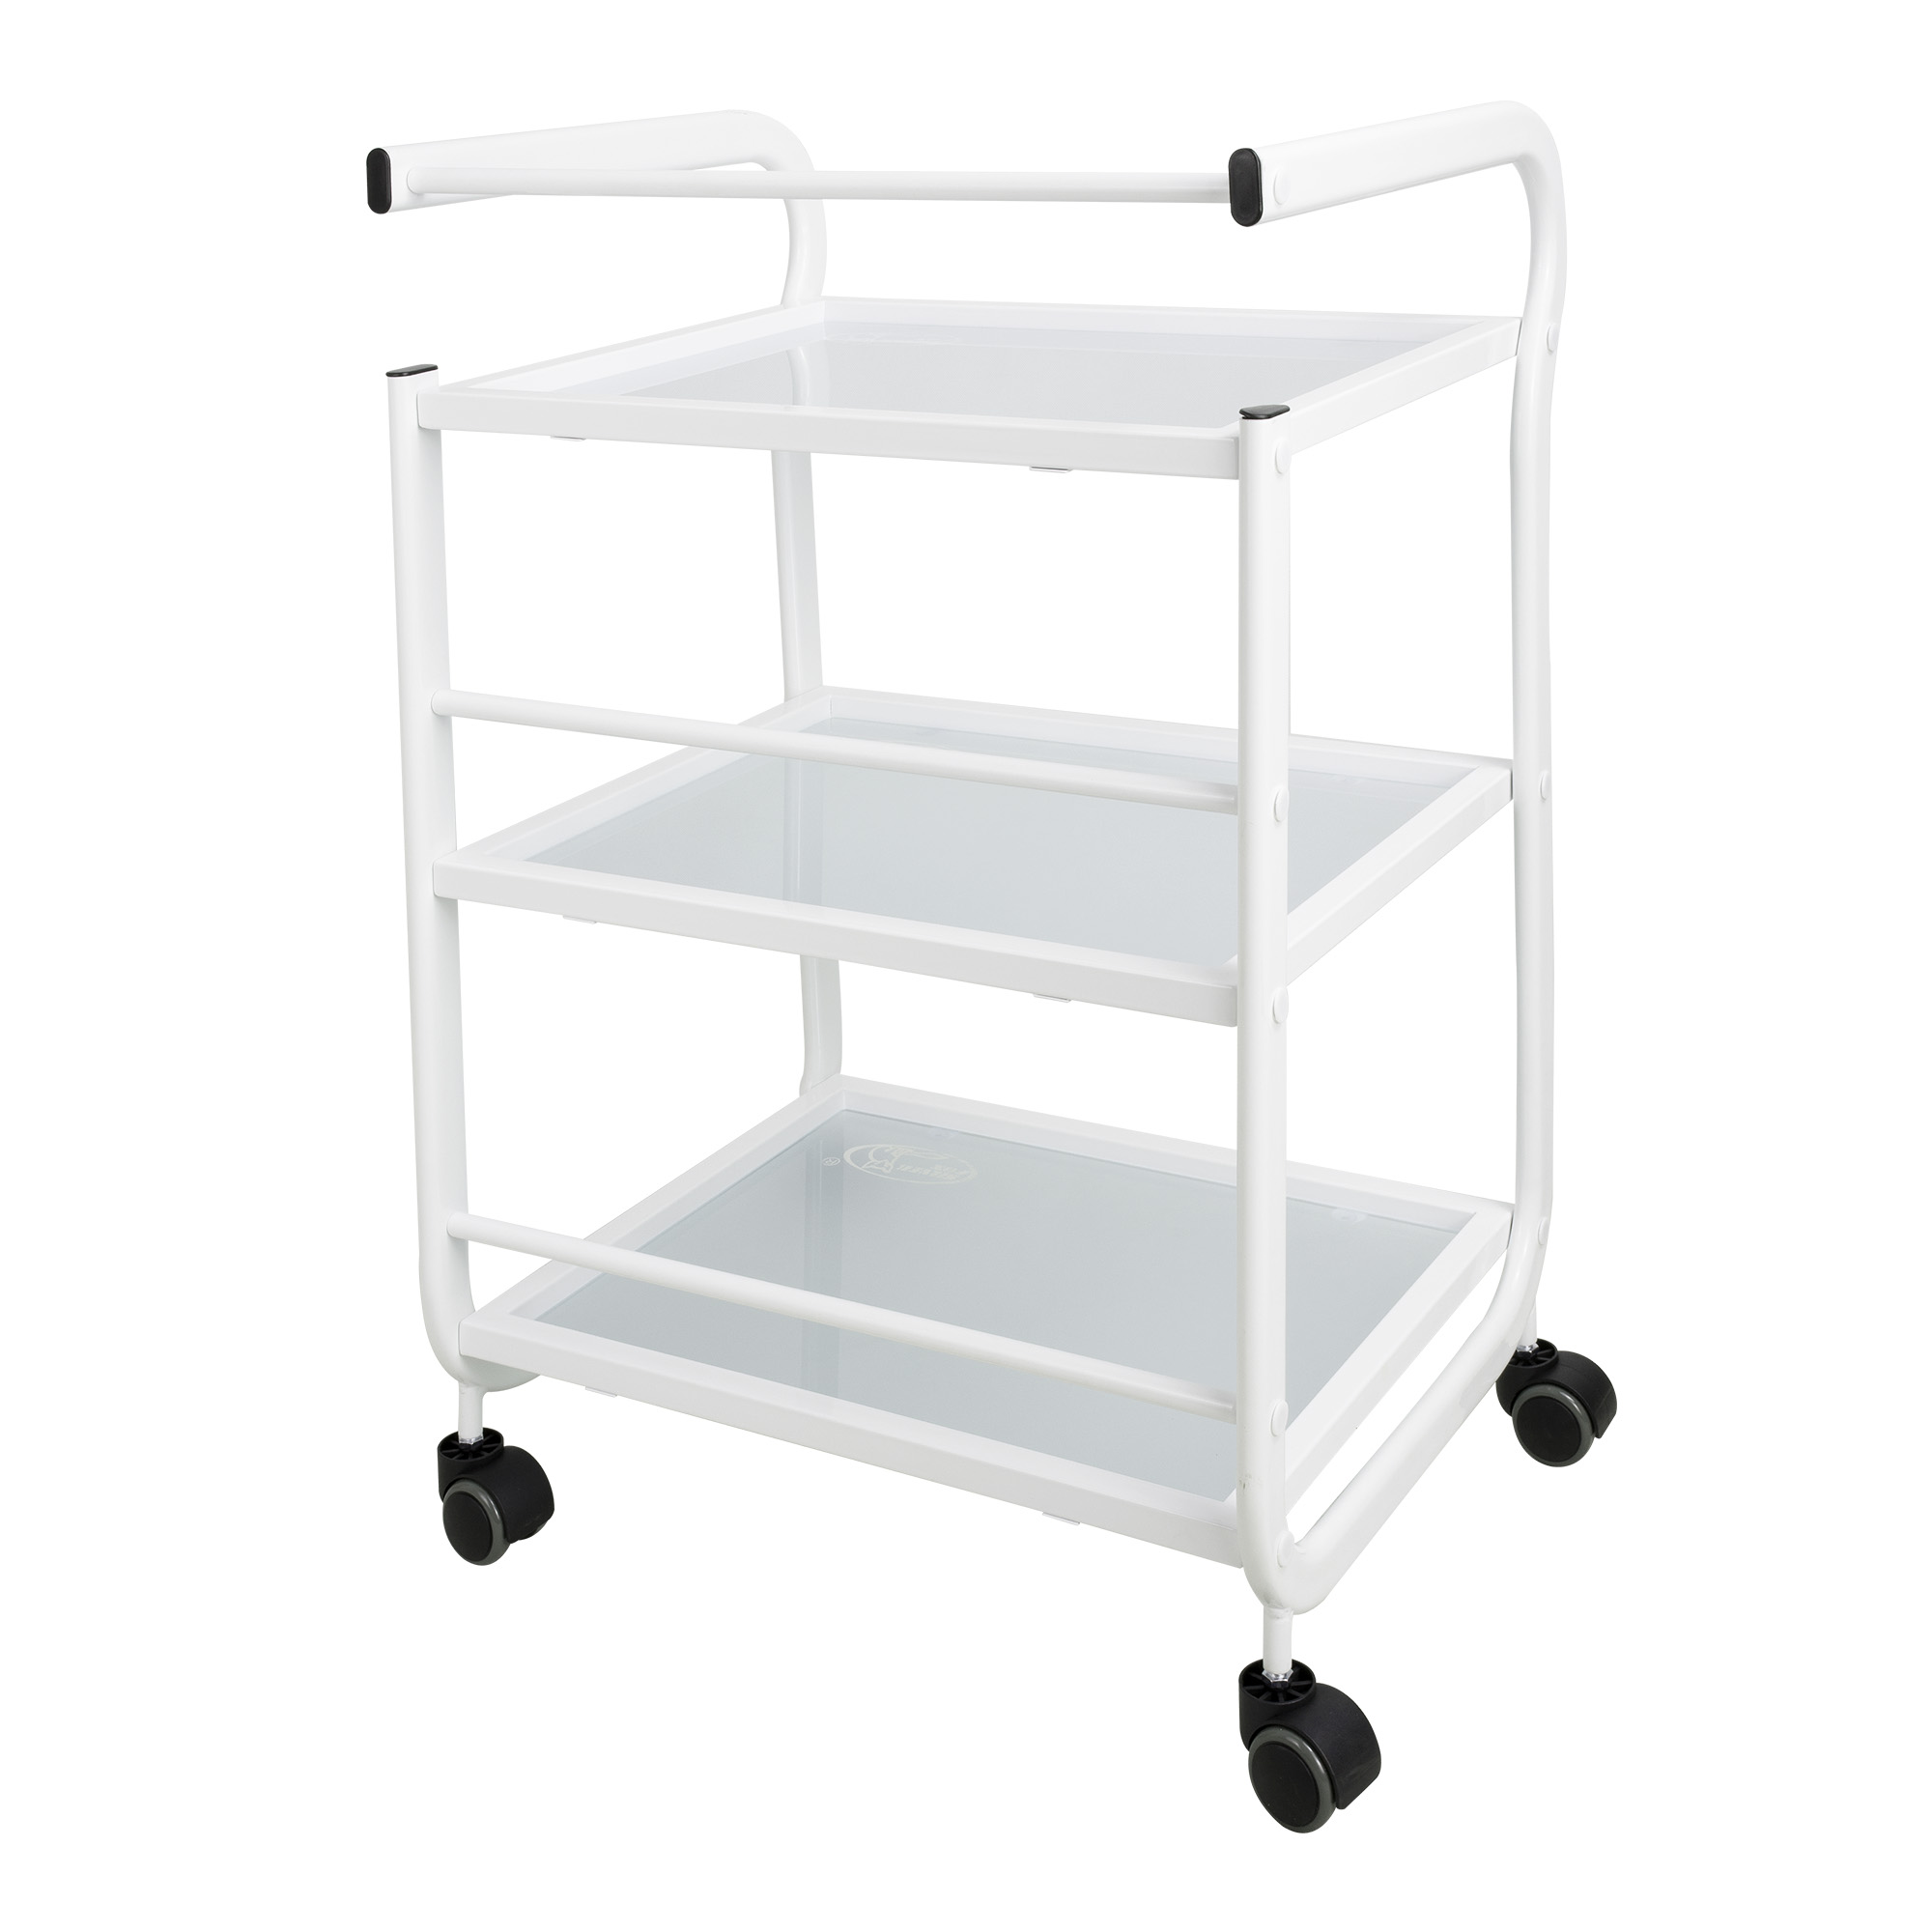 Professional furniture trolley for beauty salon 3 shelves with handle